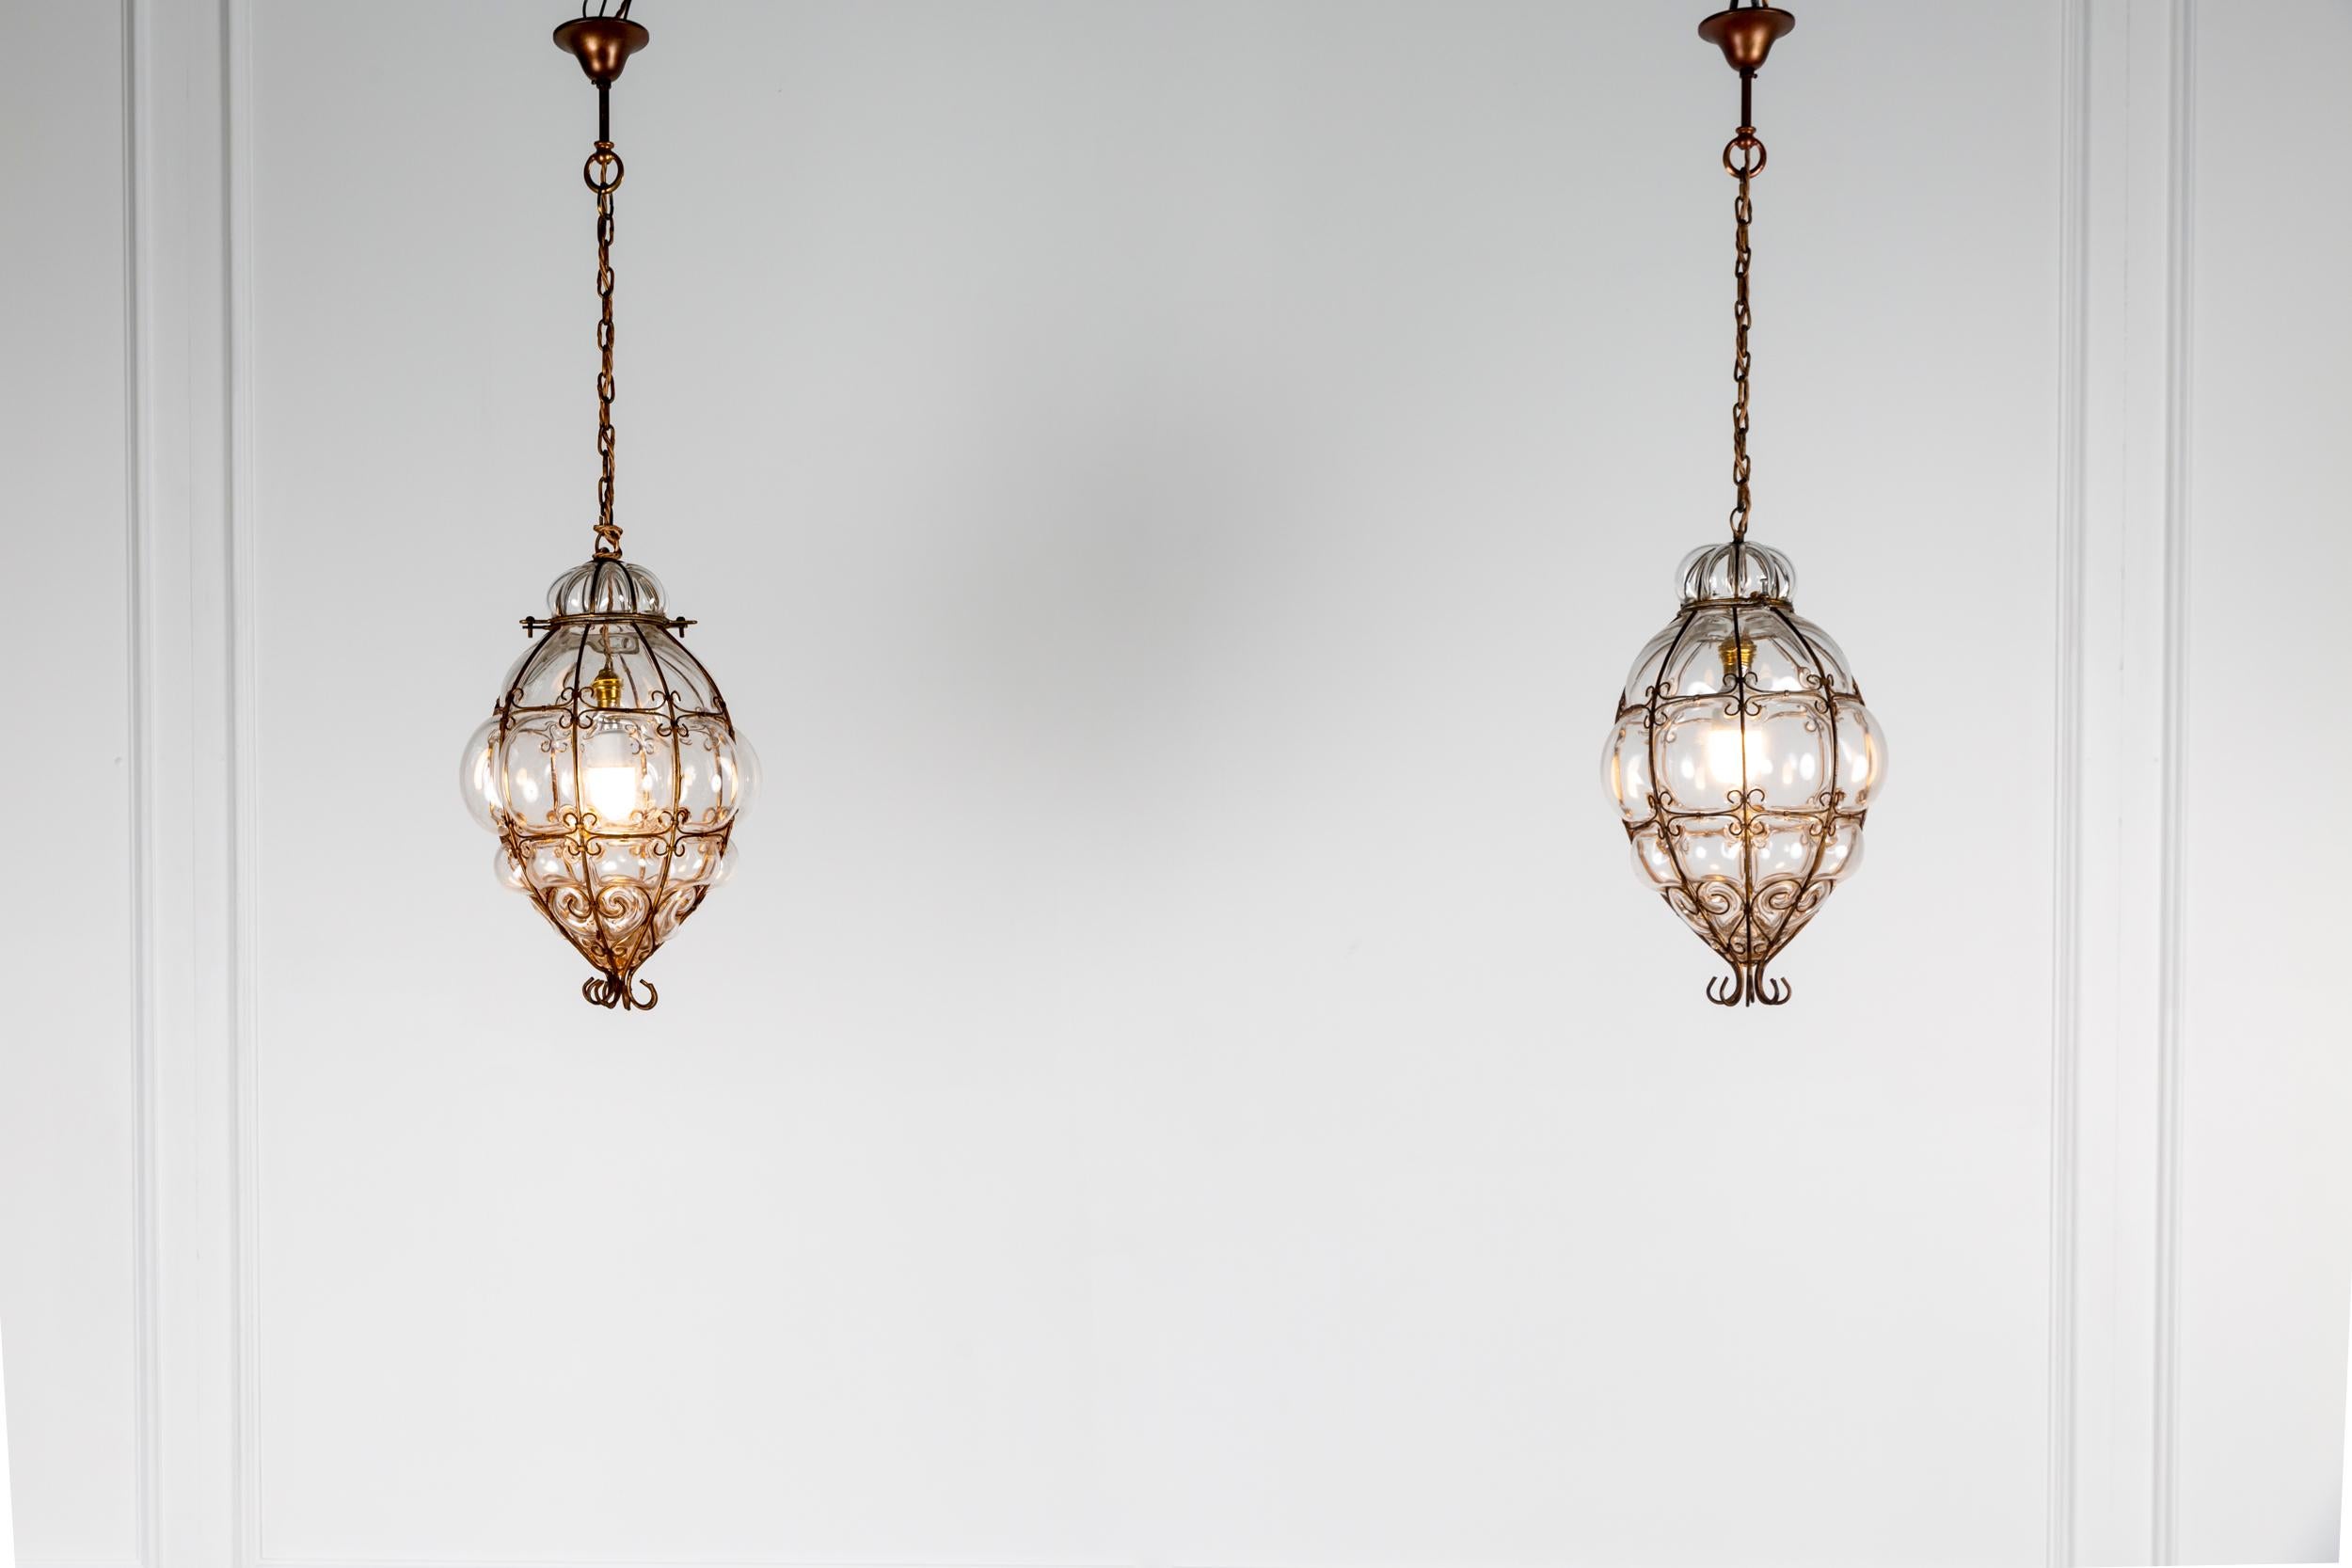 Pair of Archimede Segusomurano caged glass pendant lights.

The most beautiful pair of large hand blown murano caged glass pendant lights, by the master Venetian Glass Blower Archimede Seguso.

Casting a beautiful rippling light pattern to that of